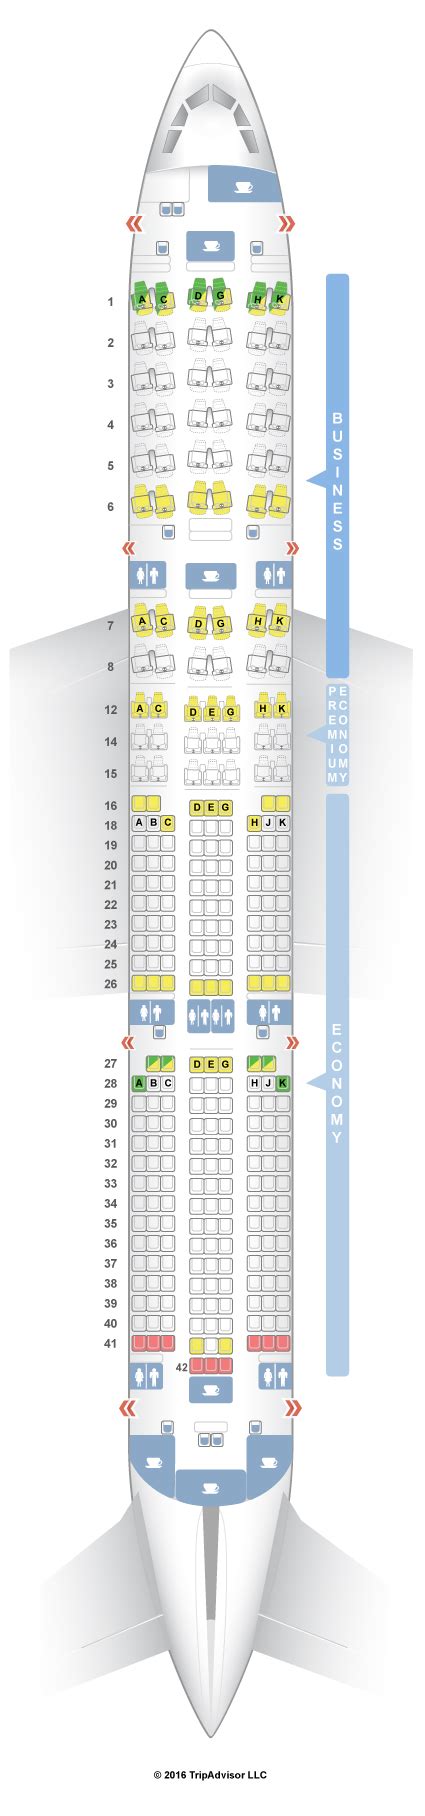 Airbus A Singapore Airlines Seat Map Airbus A Seat Map